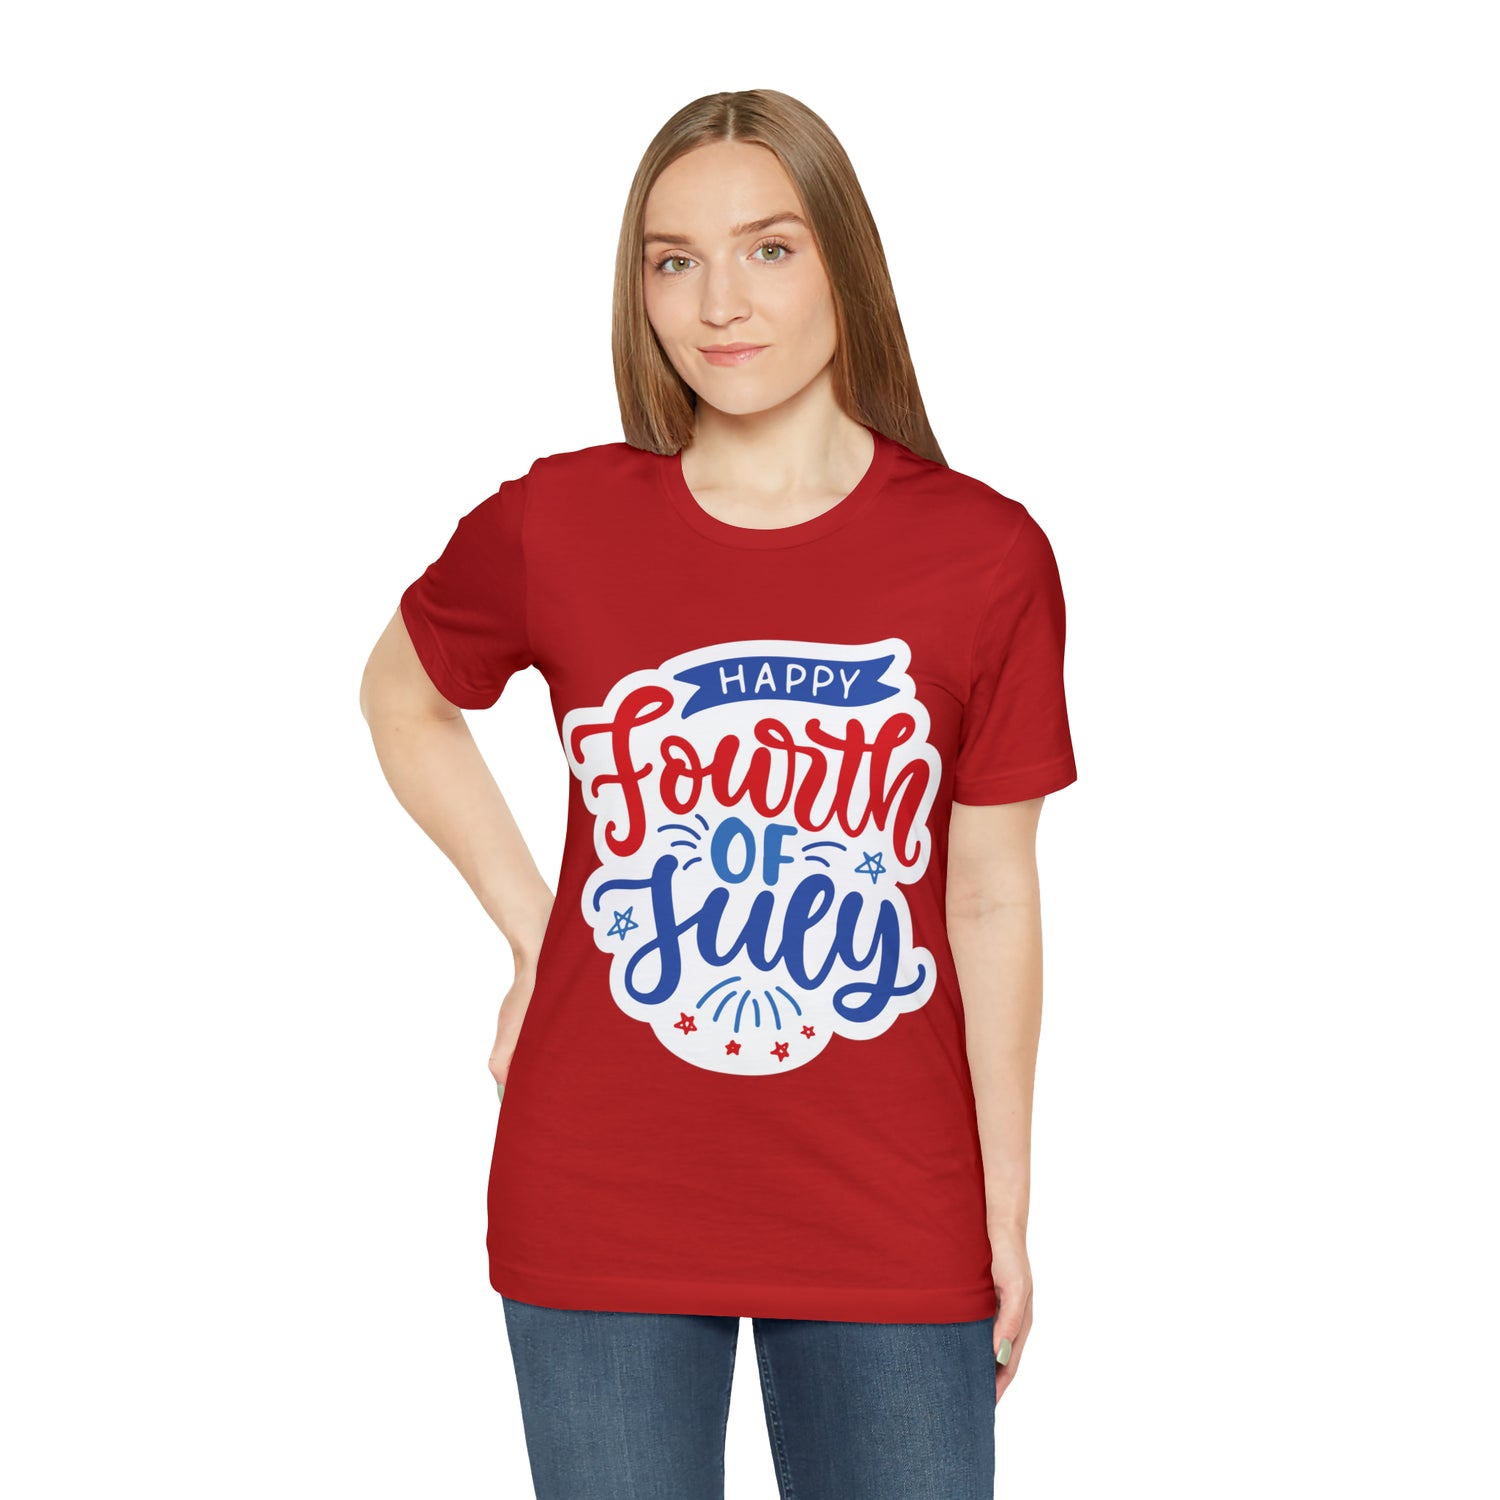 T-Shirt Tshirt Design Gift for Friend and Family Short Sleeved Shirt July 4th Independence Day Petrova Designs